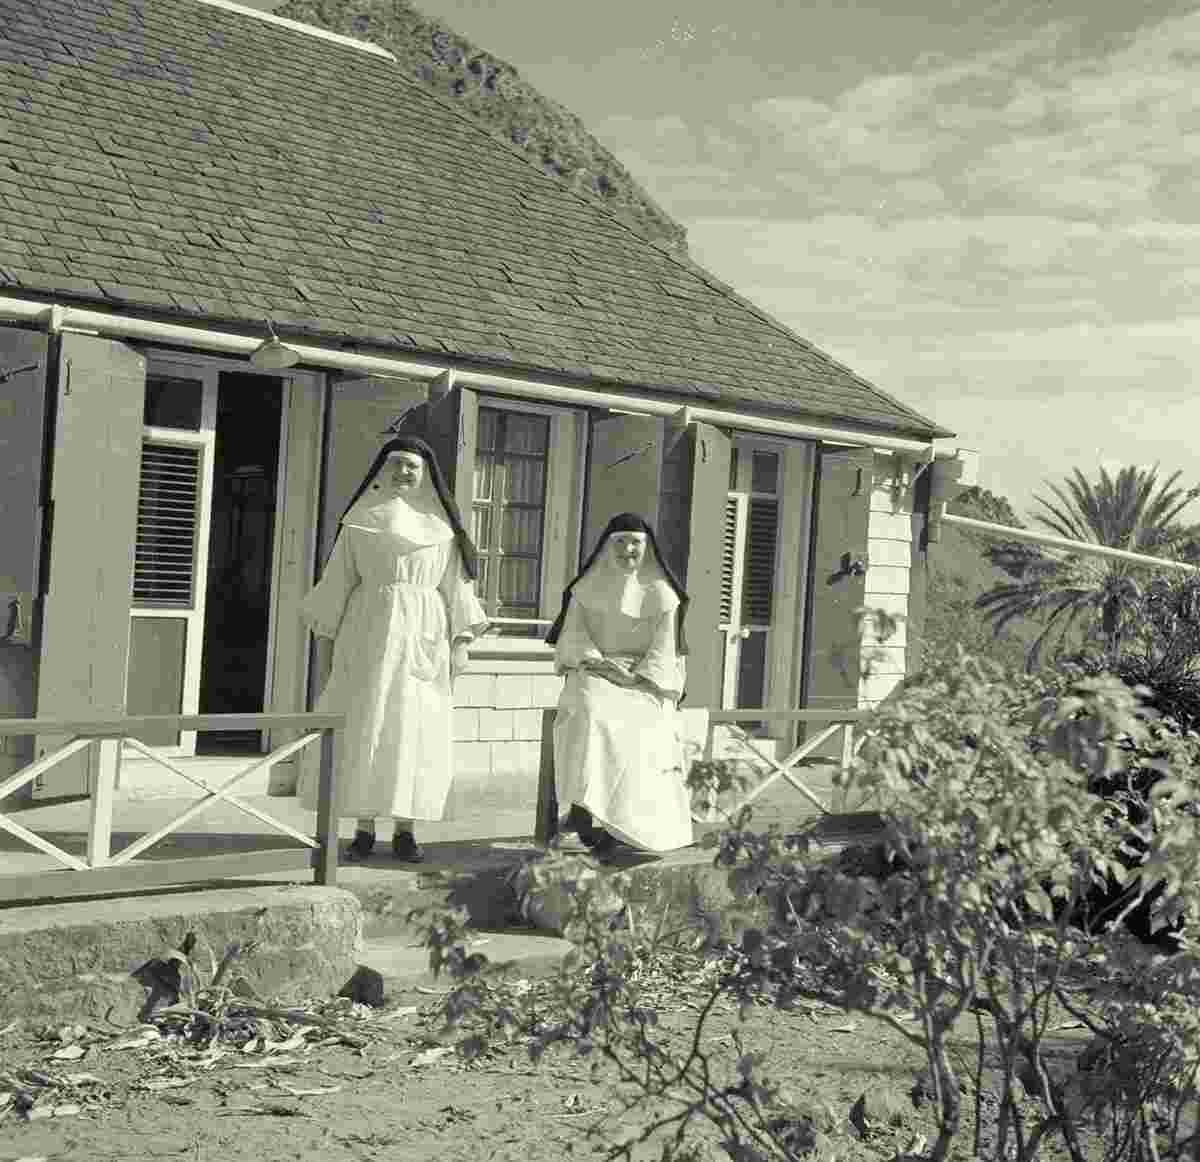 The Botton. Two nuns at a house, 1947